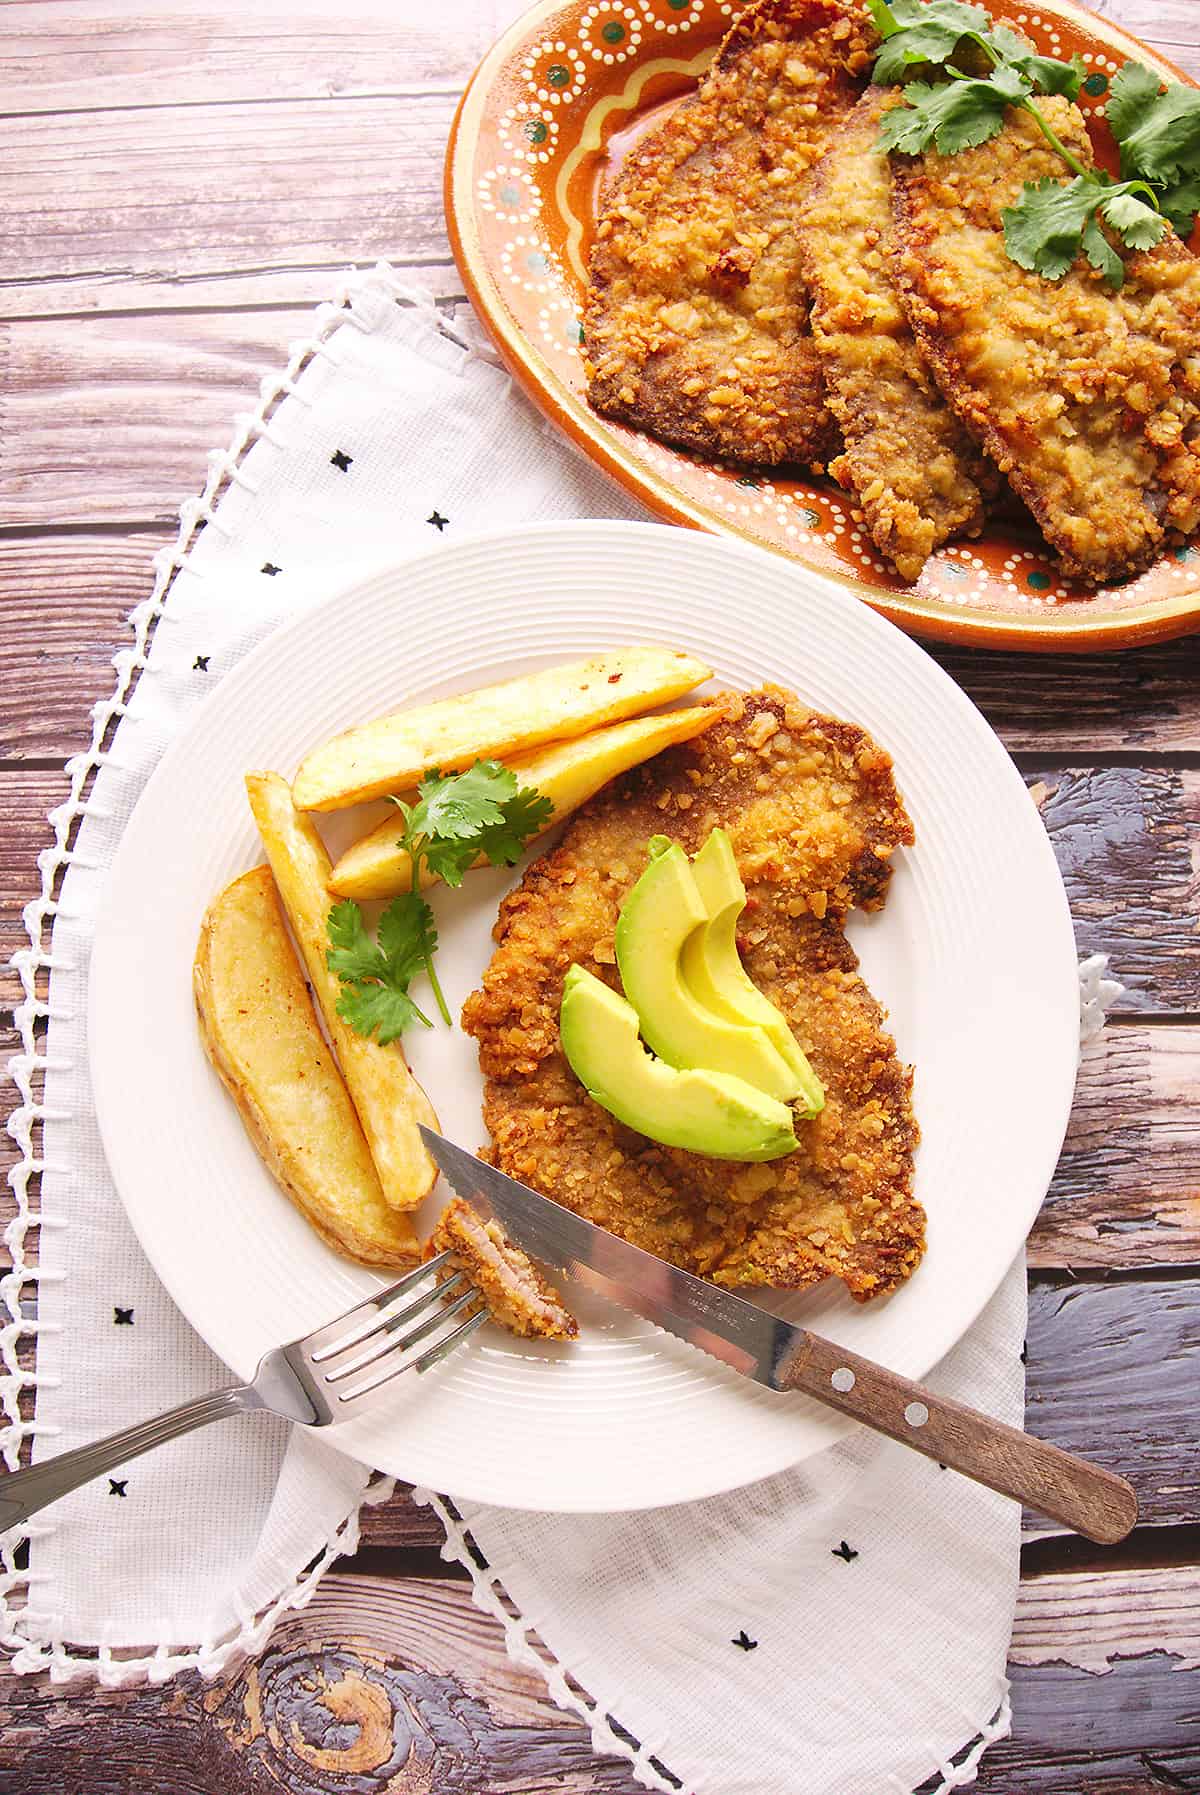 Milanesa de Res served with avocado slices on top and potato fries on a glass plate